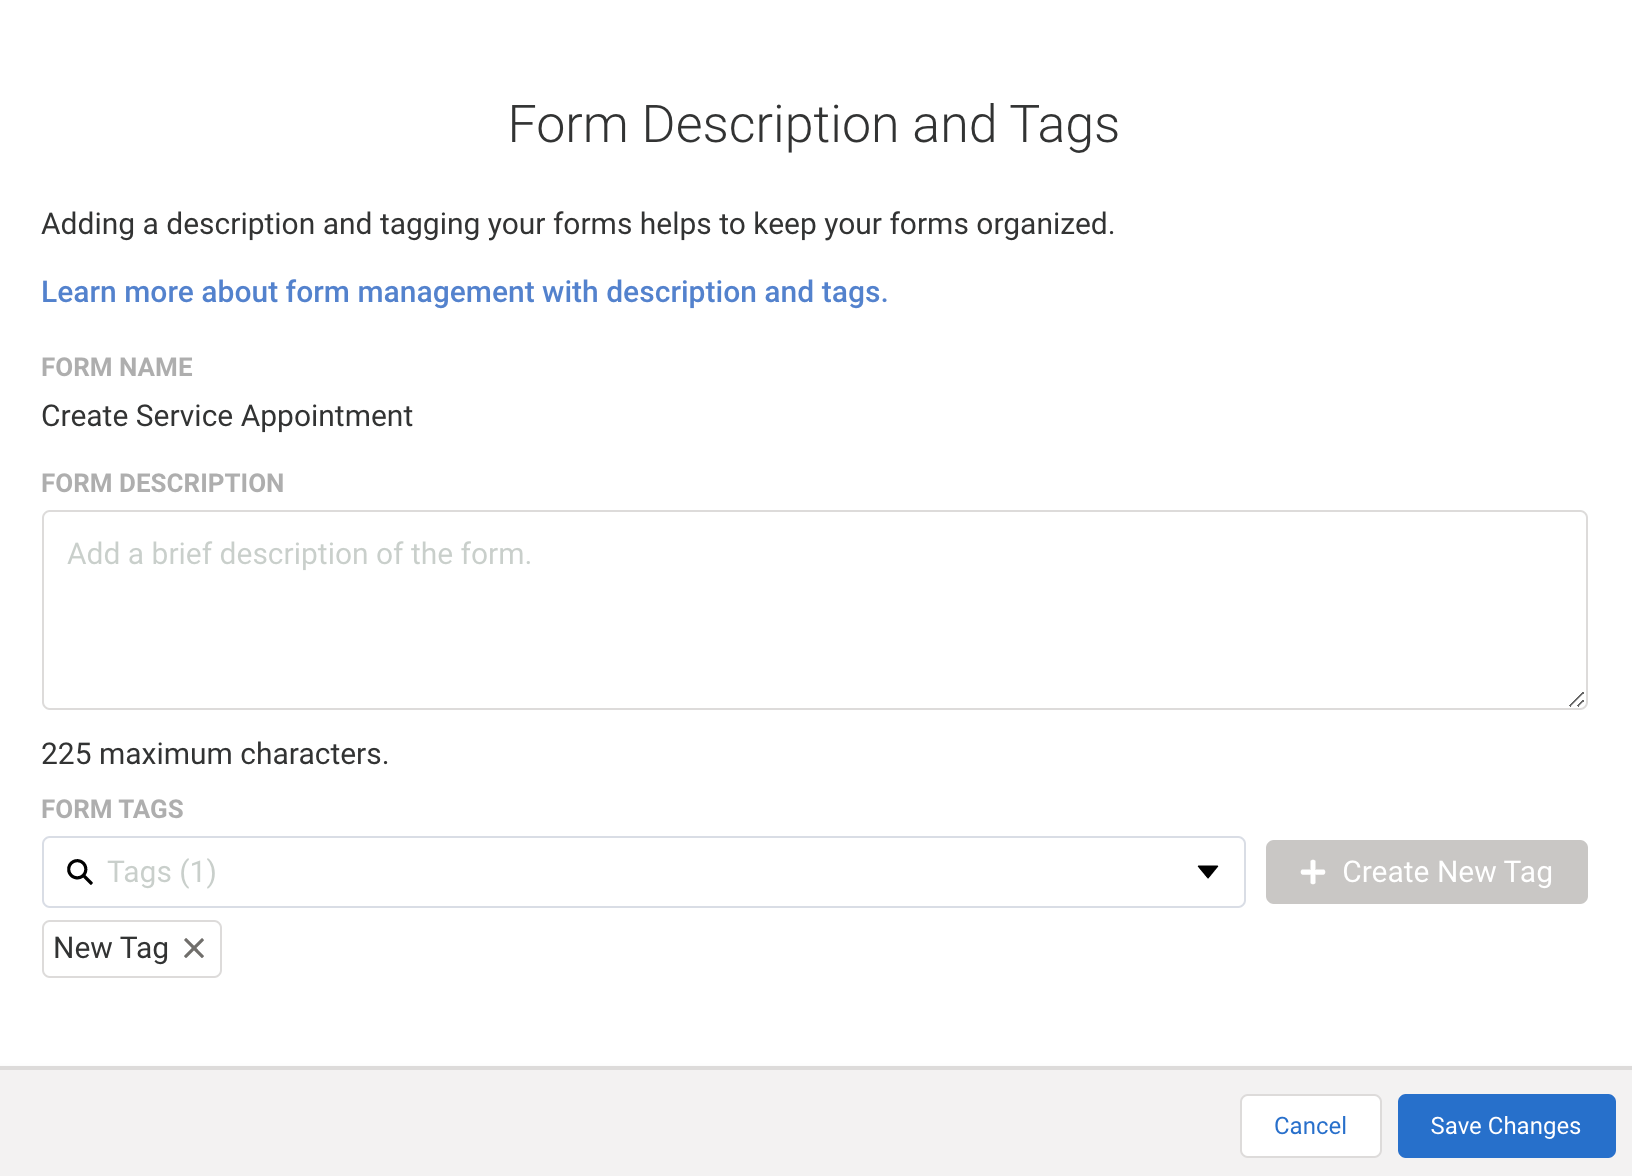 Image of the Form Description and Tags modal shown